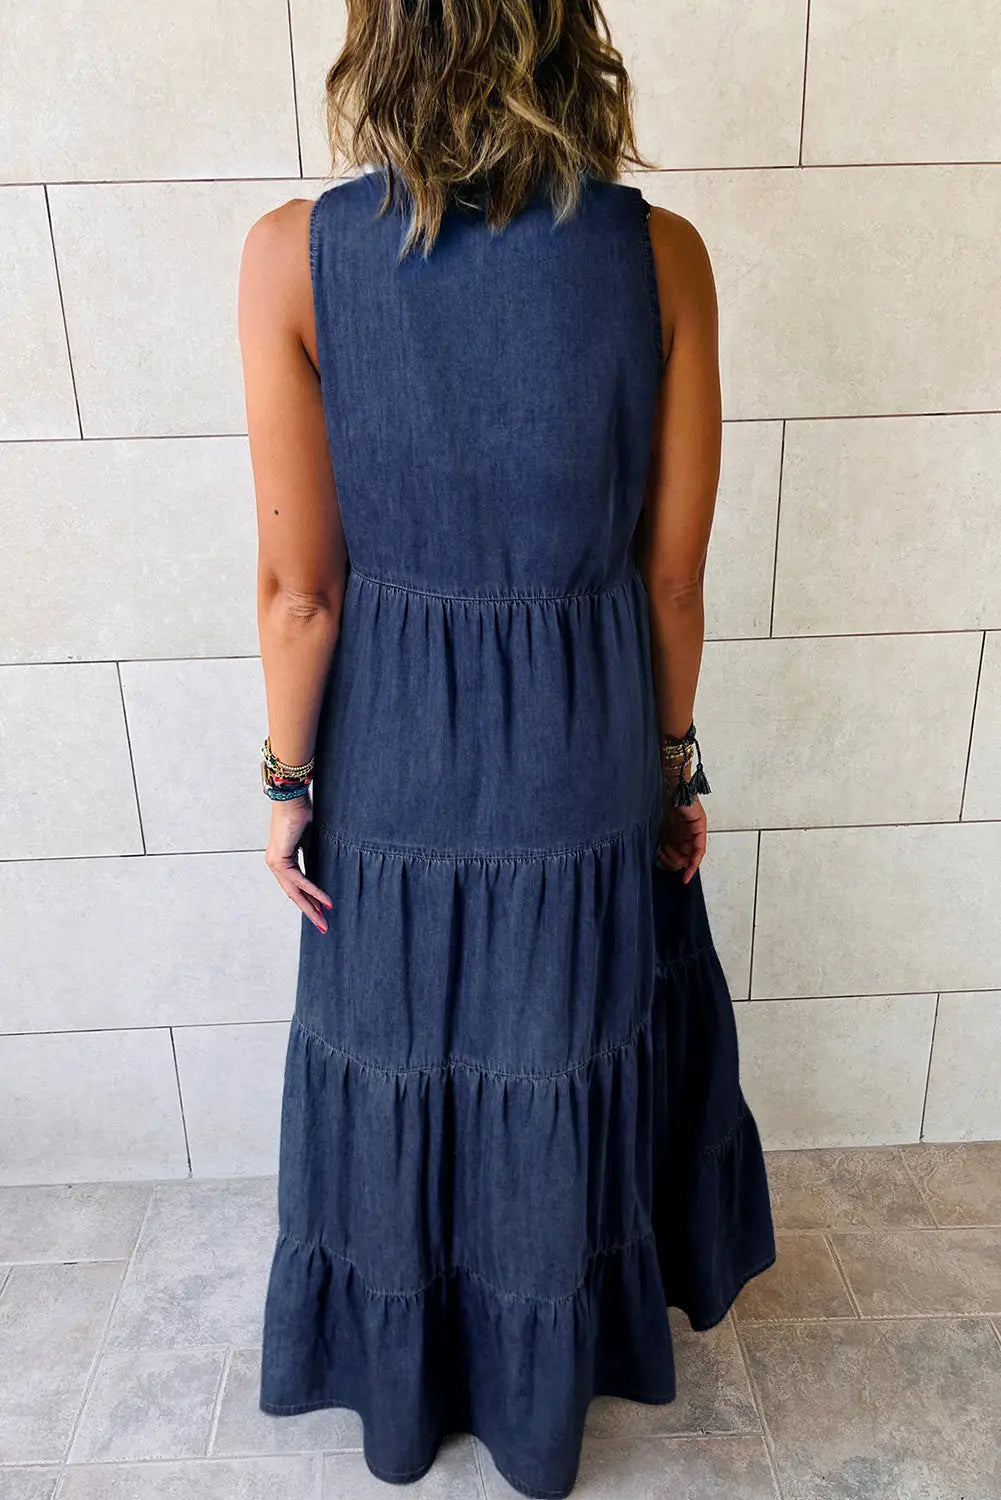 Real teal sleeveless tiered chambray maxi dress - dresses/maxi dresses